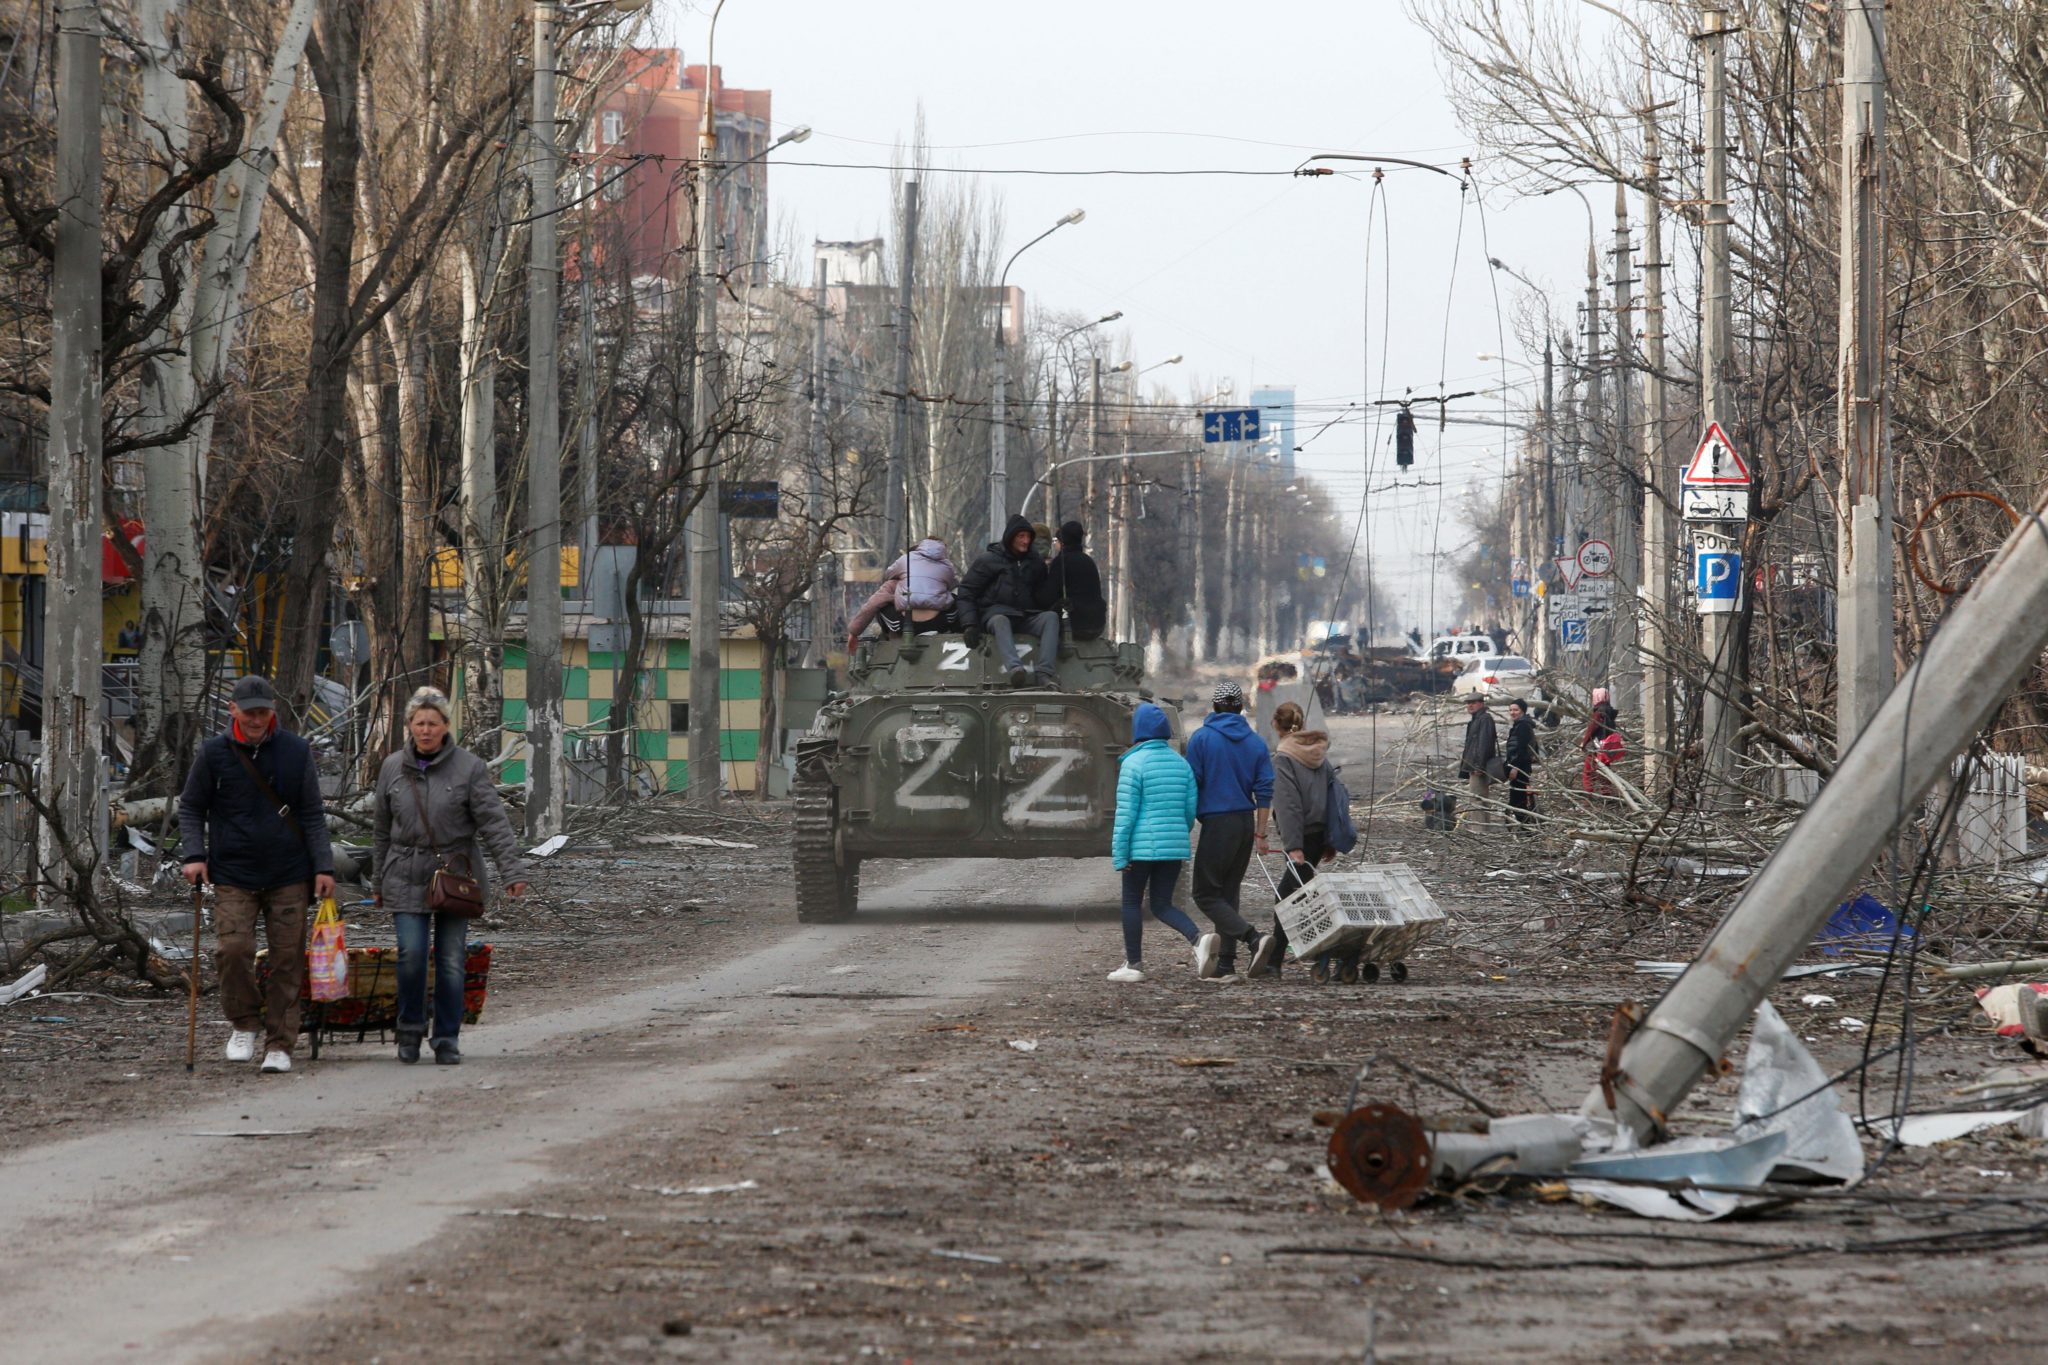 A damaged street in the besieged city of Mariupol, Ukraine, 17-04-2022. Image: REUTERS / Alamy Stock Photo